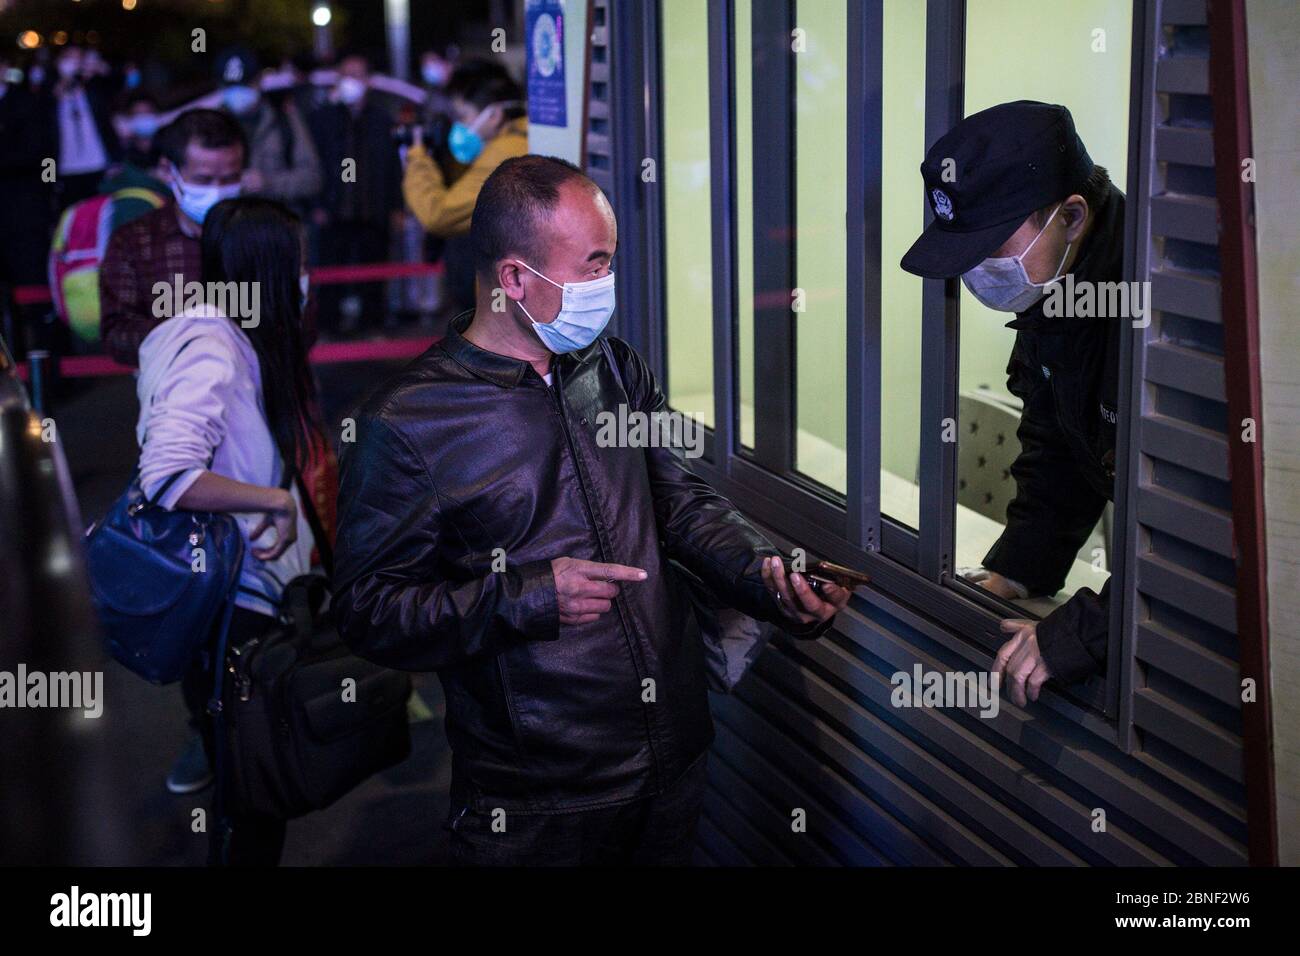 Passengers wait at the train station to leave the city as the lockdown ends, Wuhan city, central China's Hubei province, at midnight of 8 April 2020. Stock Photo